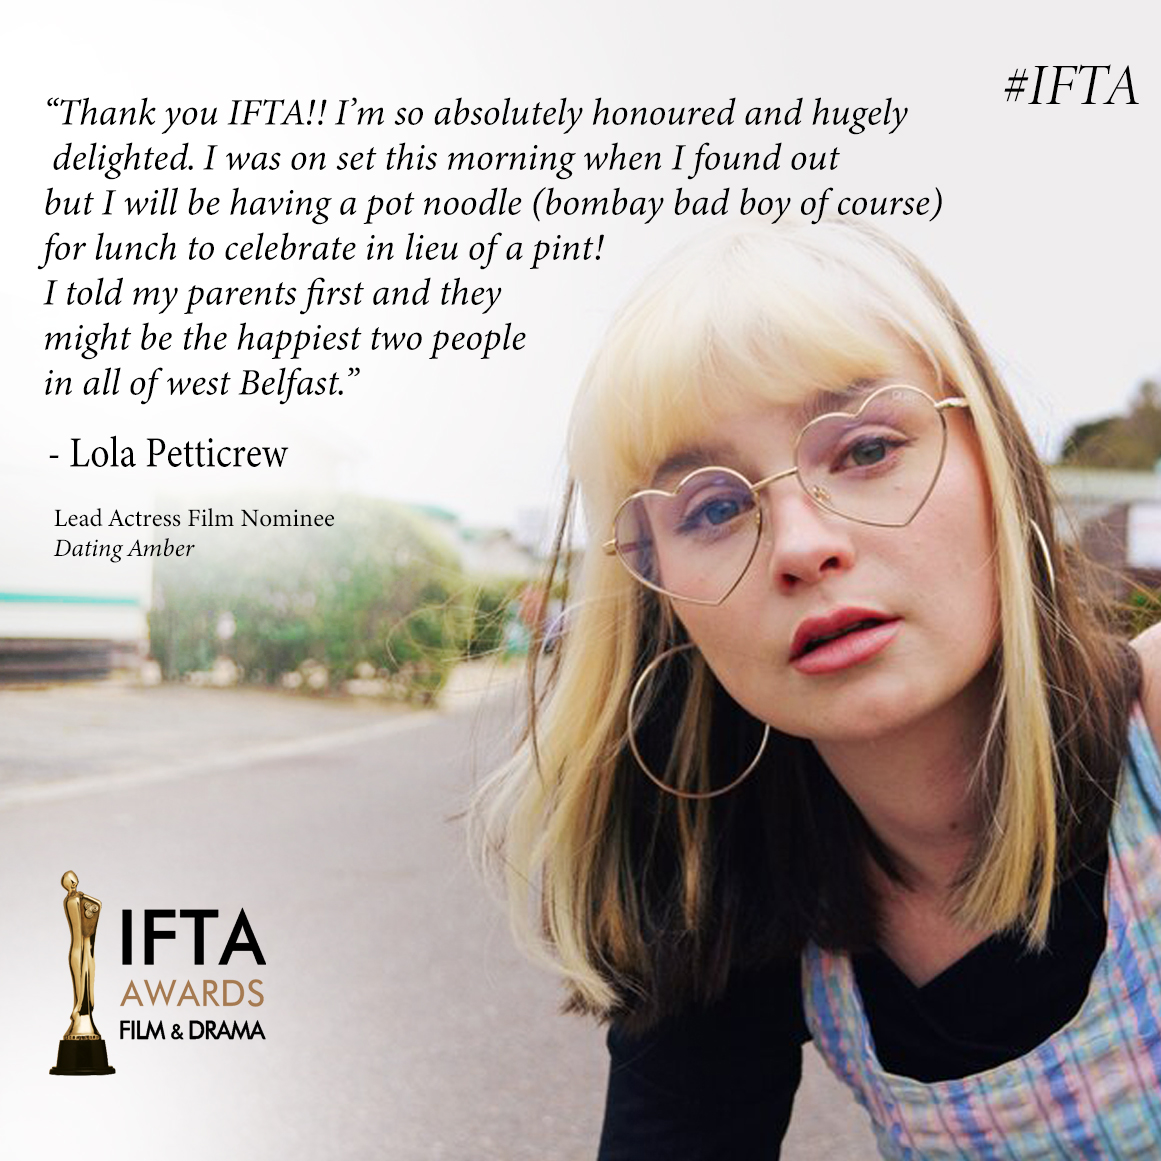 'I told my parents first and they might be the happiest two people in all of west Belfast.' And so they should be @LolaPetticrew! Congratulations on your first #IFTA Nomination for #DatingAmber